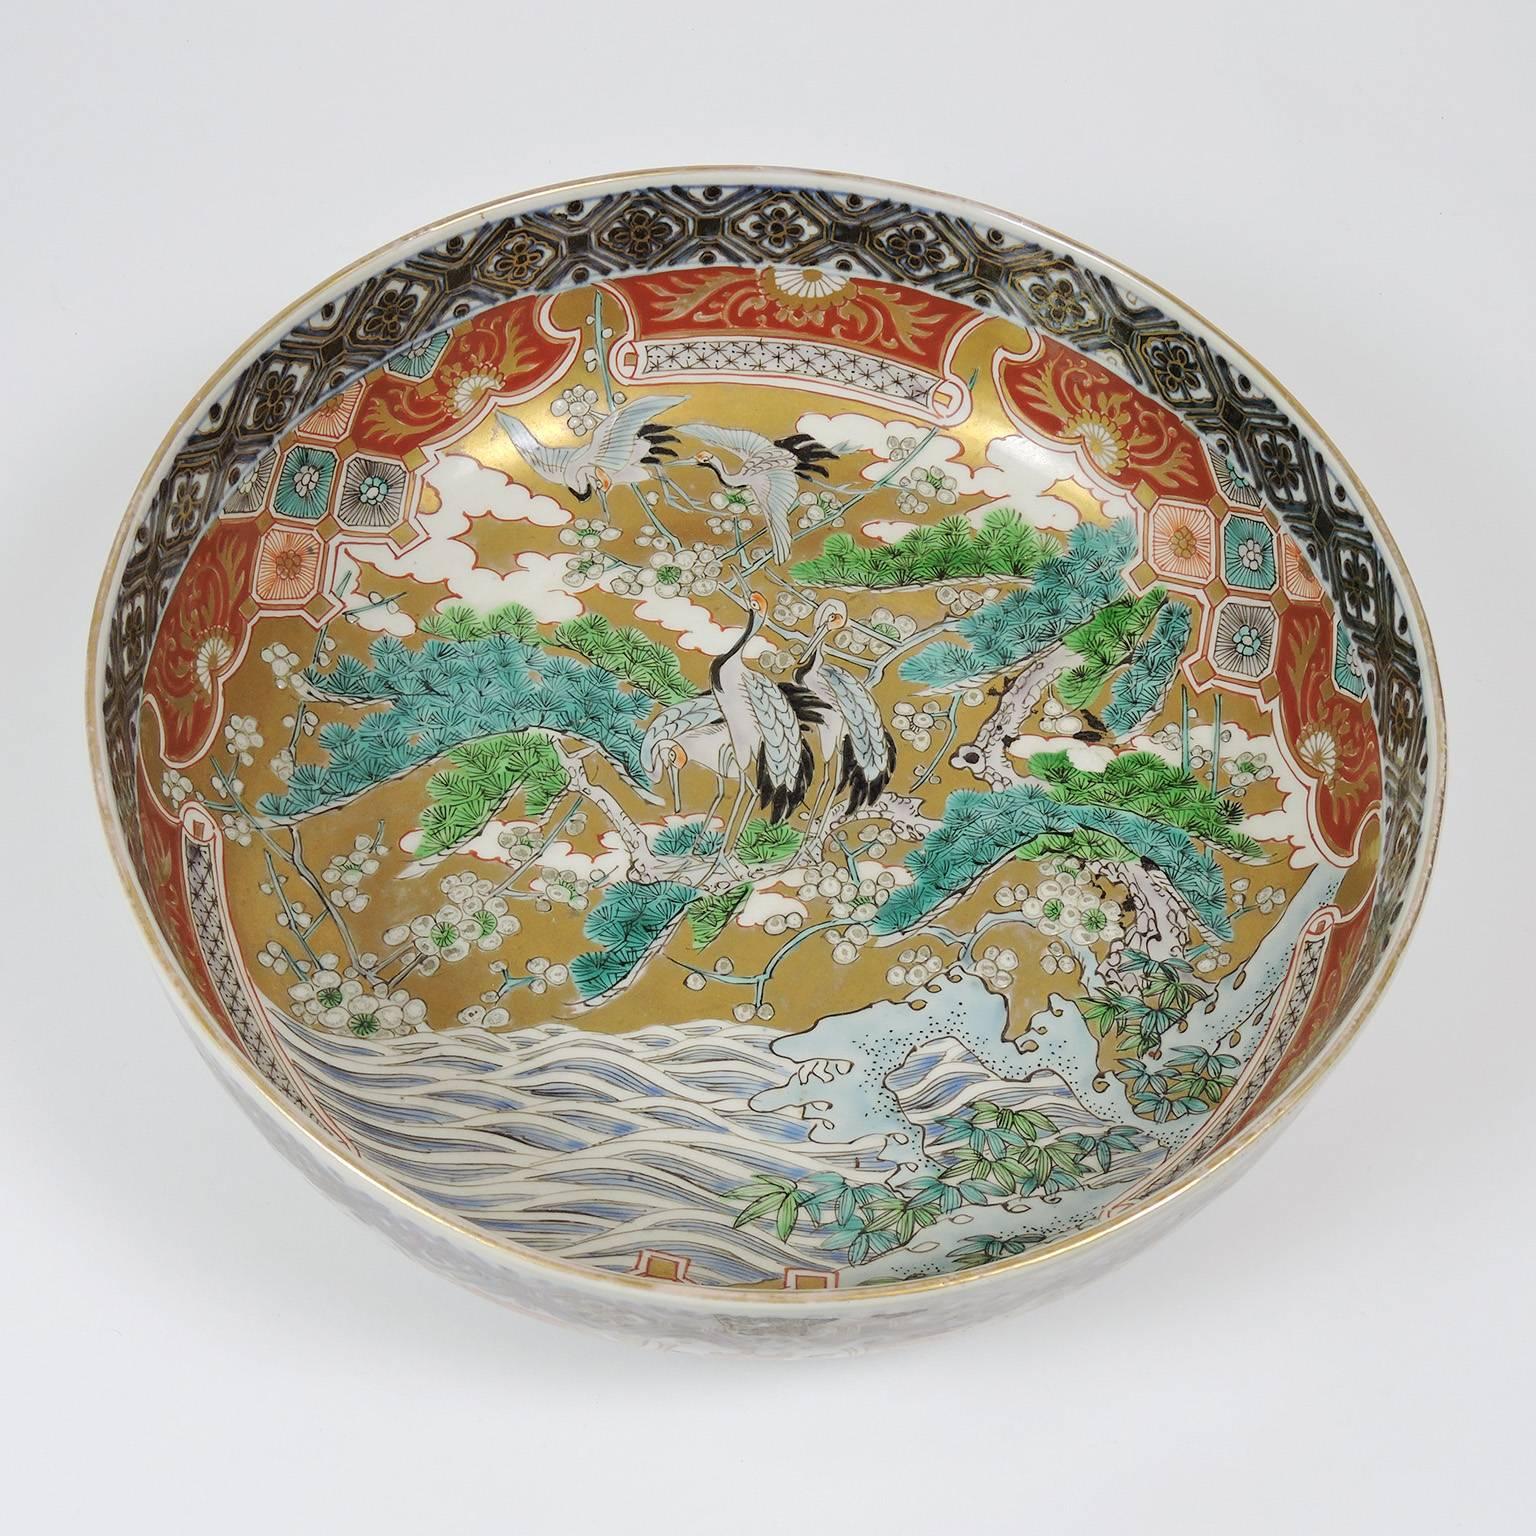 Japanese Kutani porcelain center bowl with crane decoration, late 19th century. 
Measures: Diameter: 12 inches, height: 4 inches.